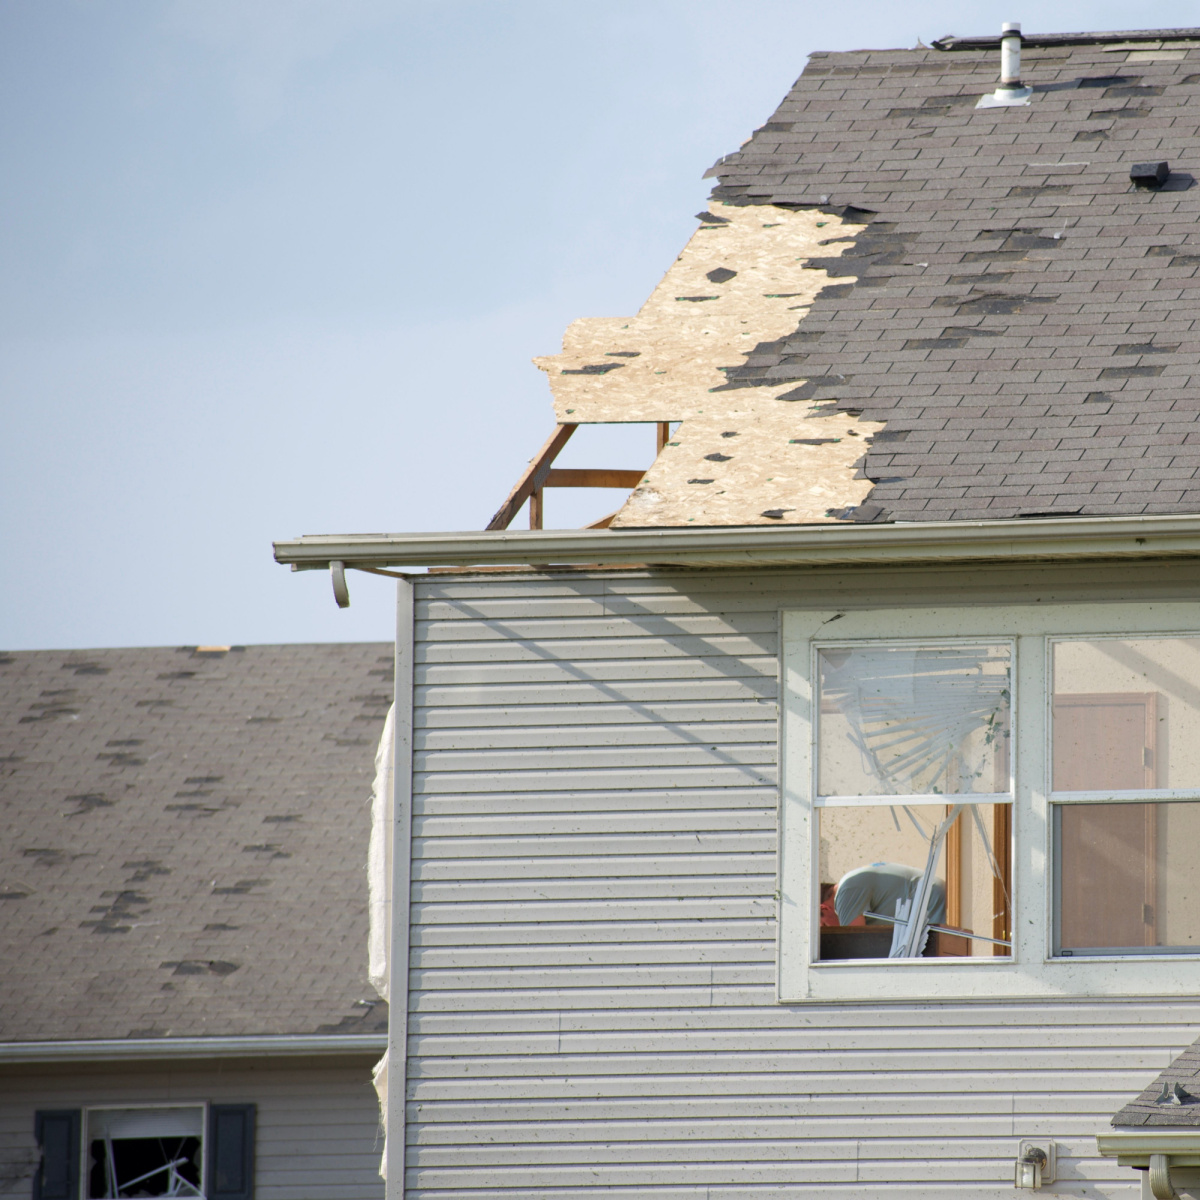 Should You Get a Dallas Roof Replacement After a Storm?